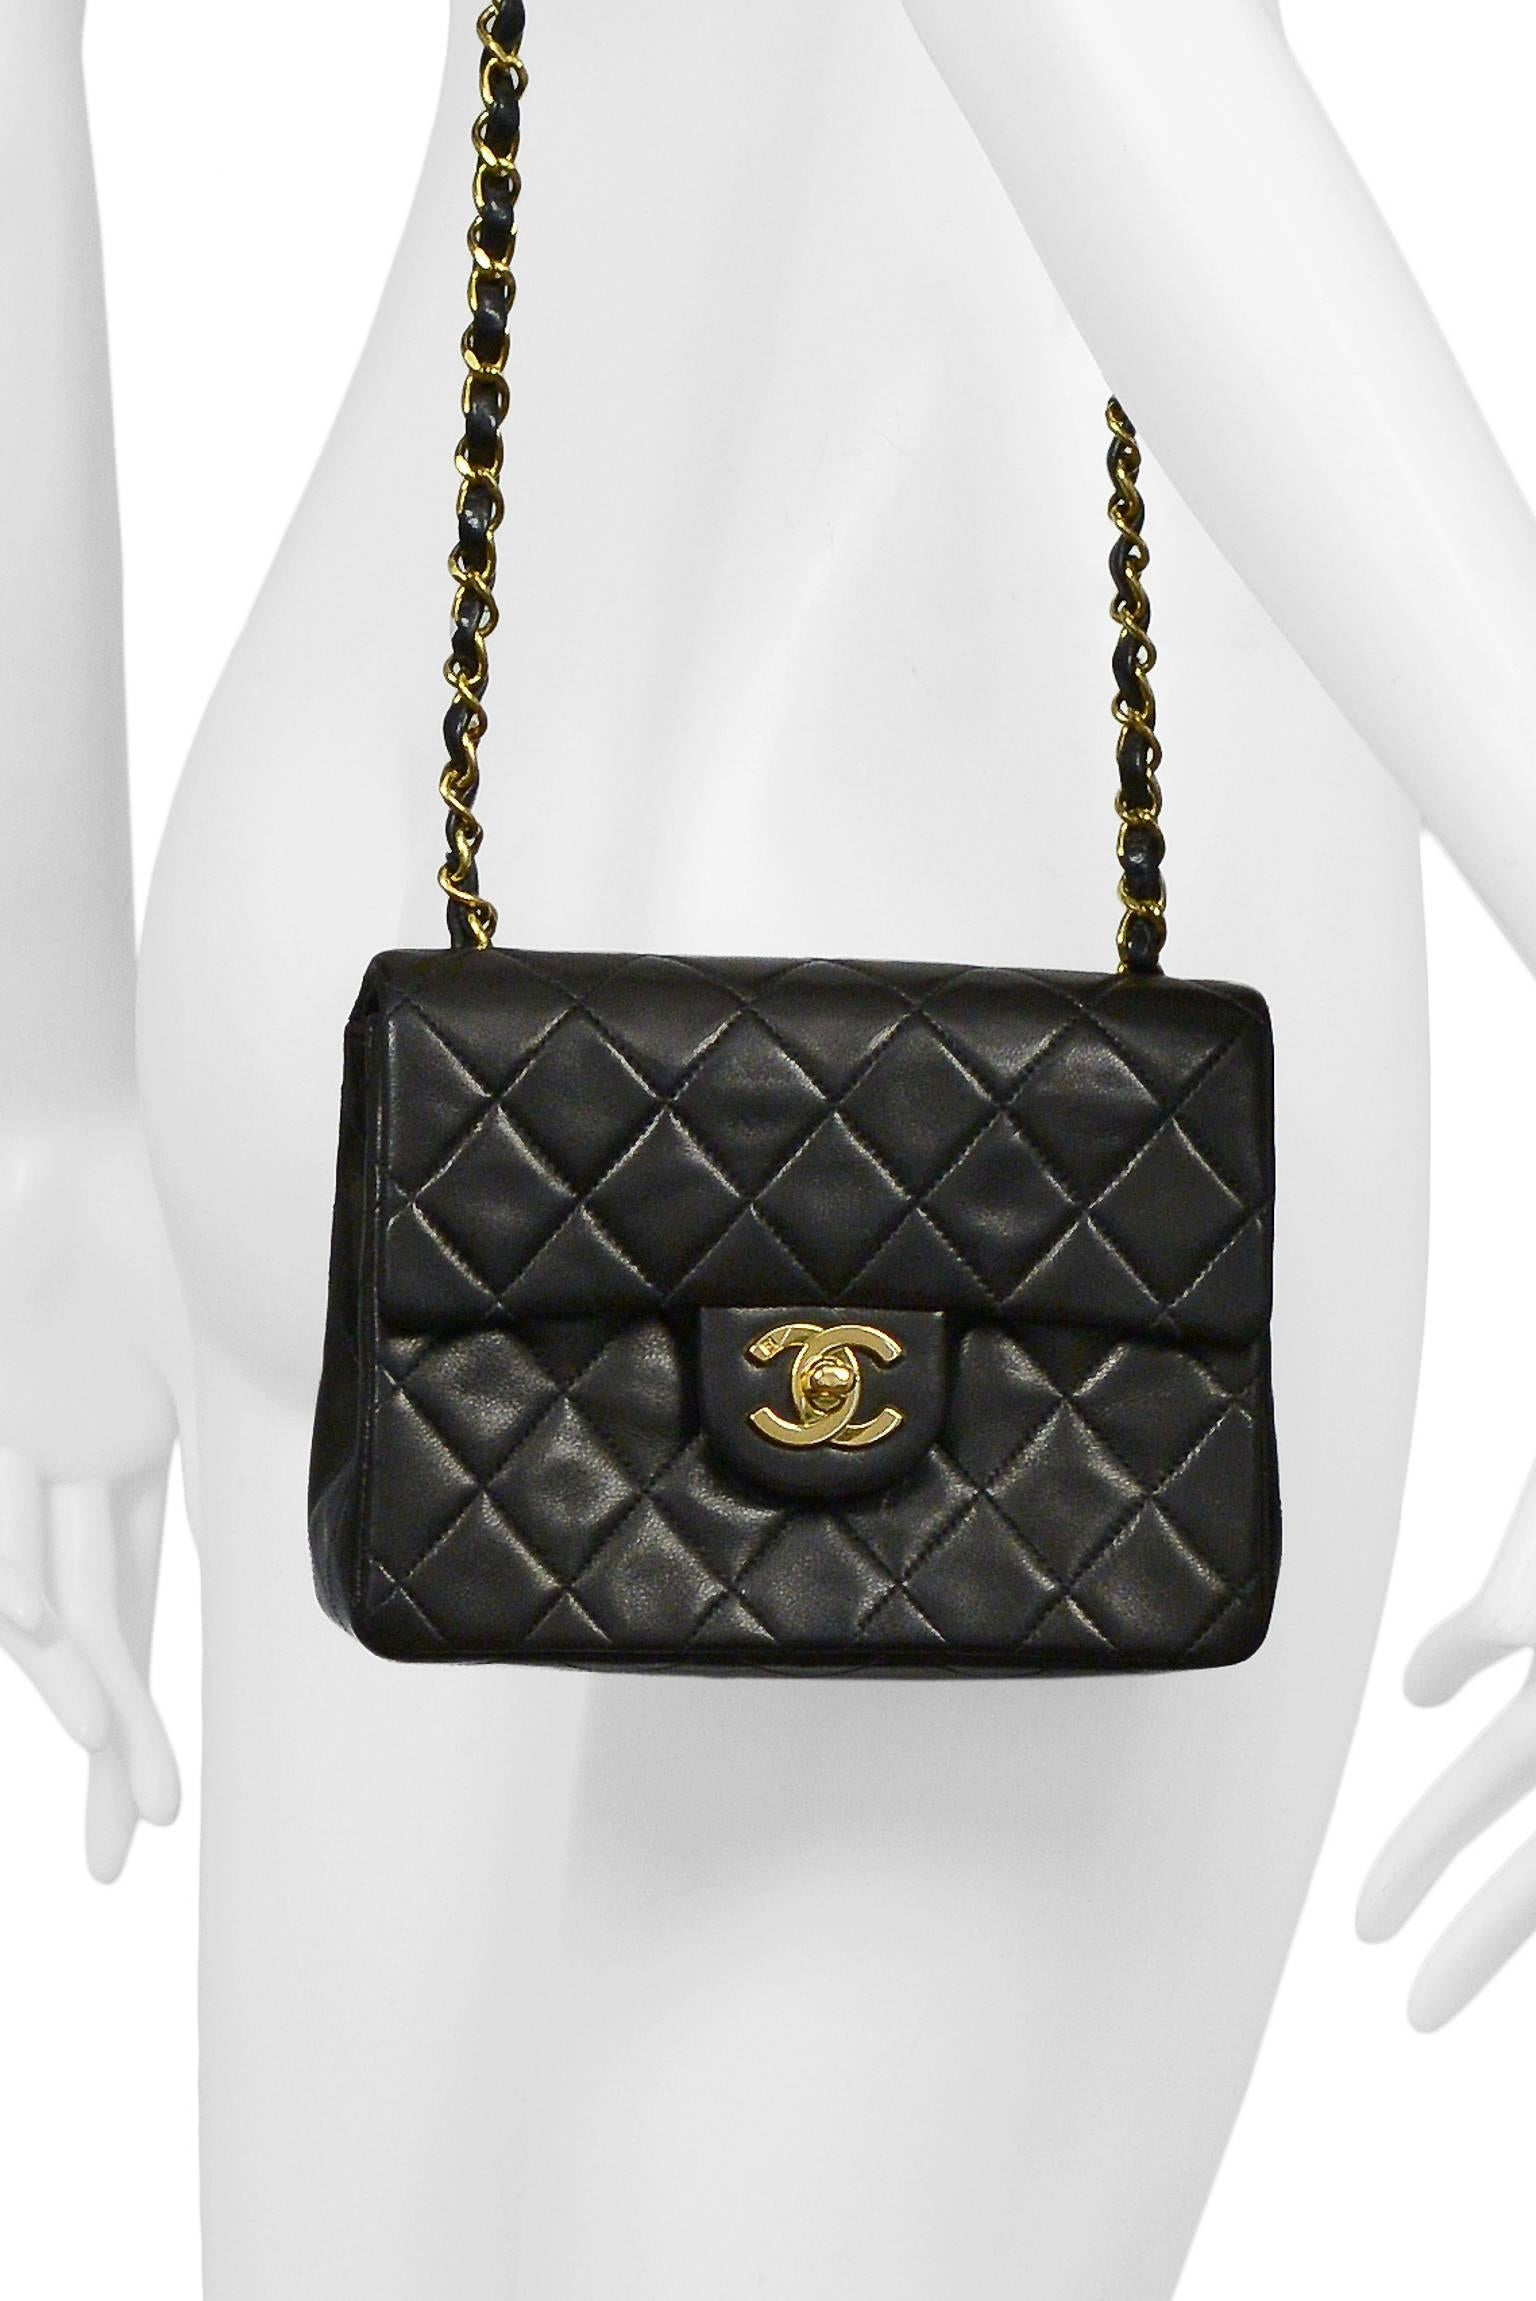 Vintage Chanel Classic mini bag in black quilted lambskin featuring leather interior lining, iconic leather and gold tone chain woven straps, a classic patch pocket at the back, one inner pocket, one inner hidden zip pocket, and a gold tone